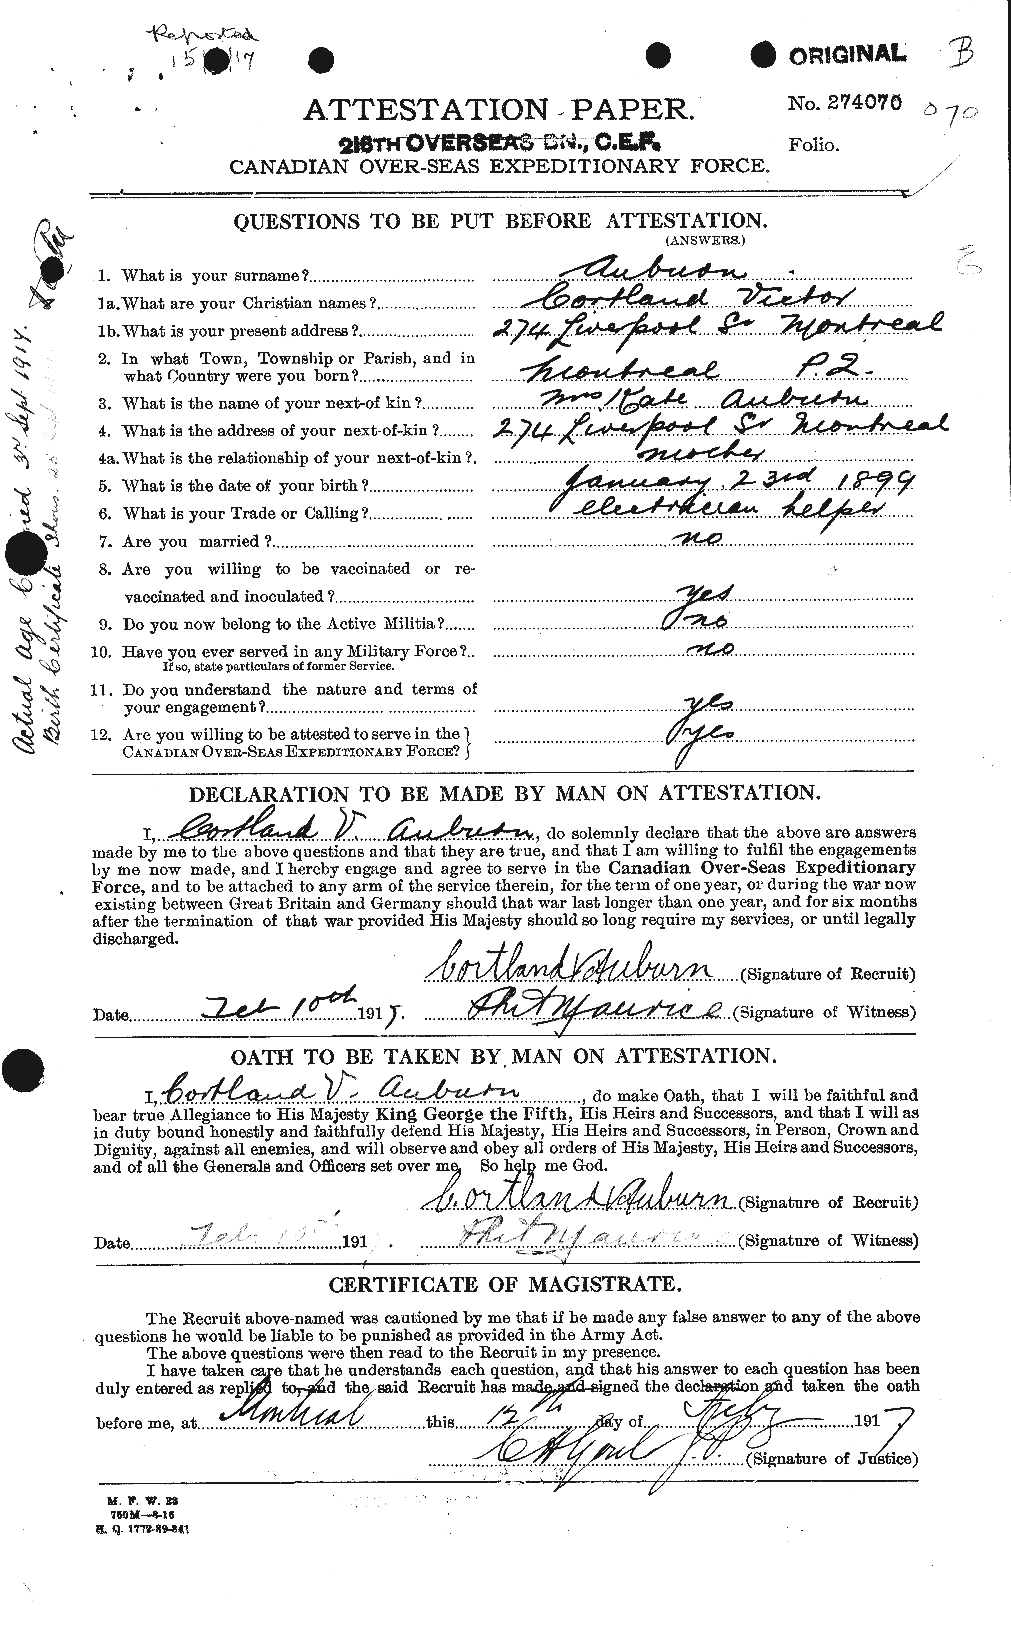 Personnel Records of the First World War - CEF 224630a